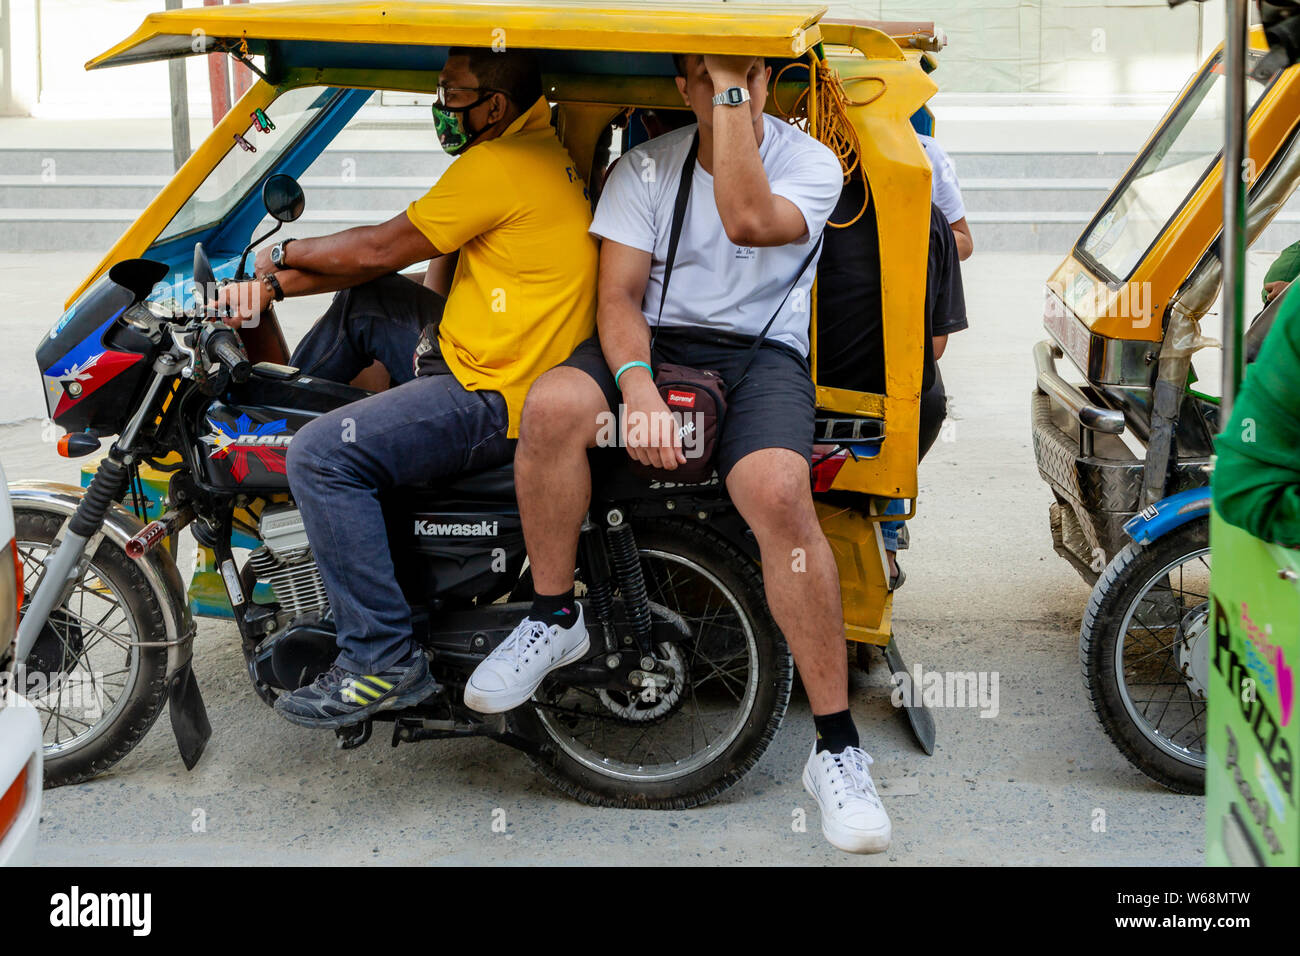 A Tricycle Transporting Tourists, Boracay, Aklan Province, The Philippines Stock Photo